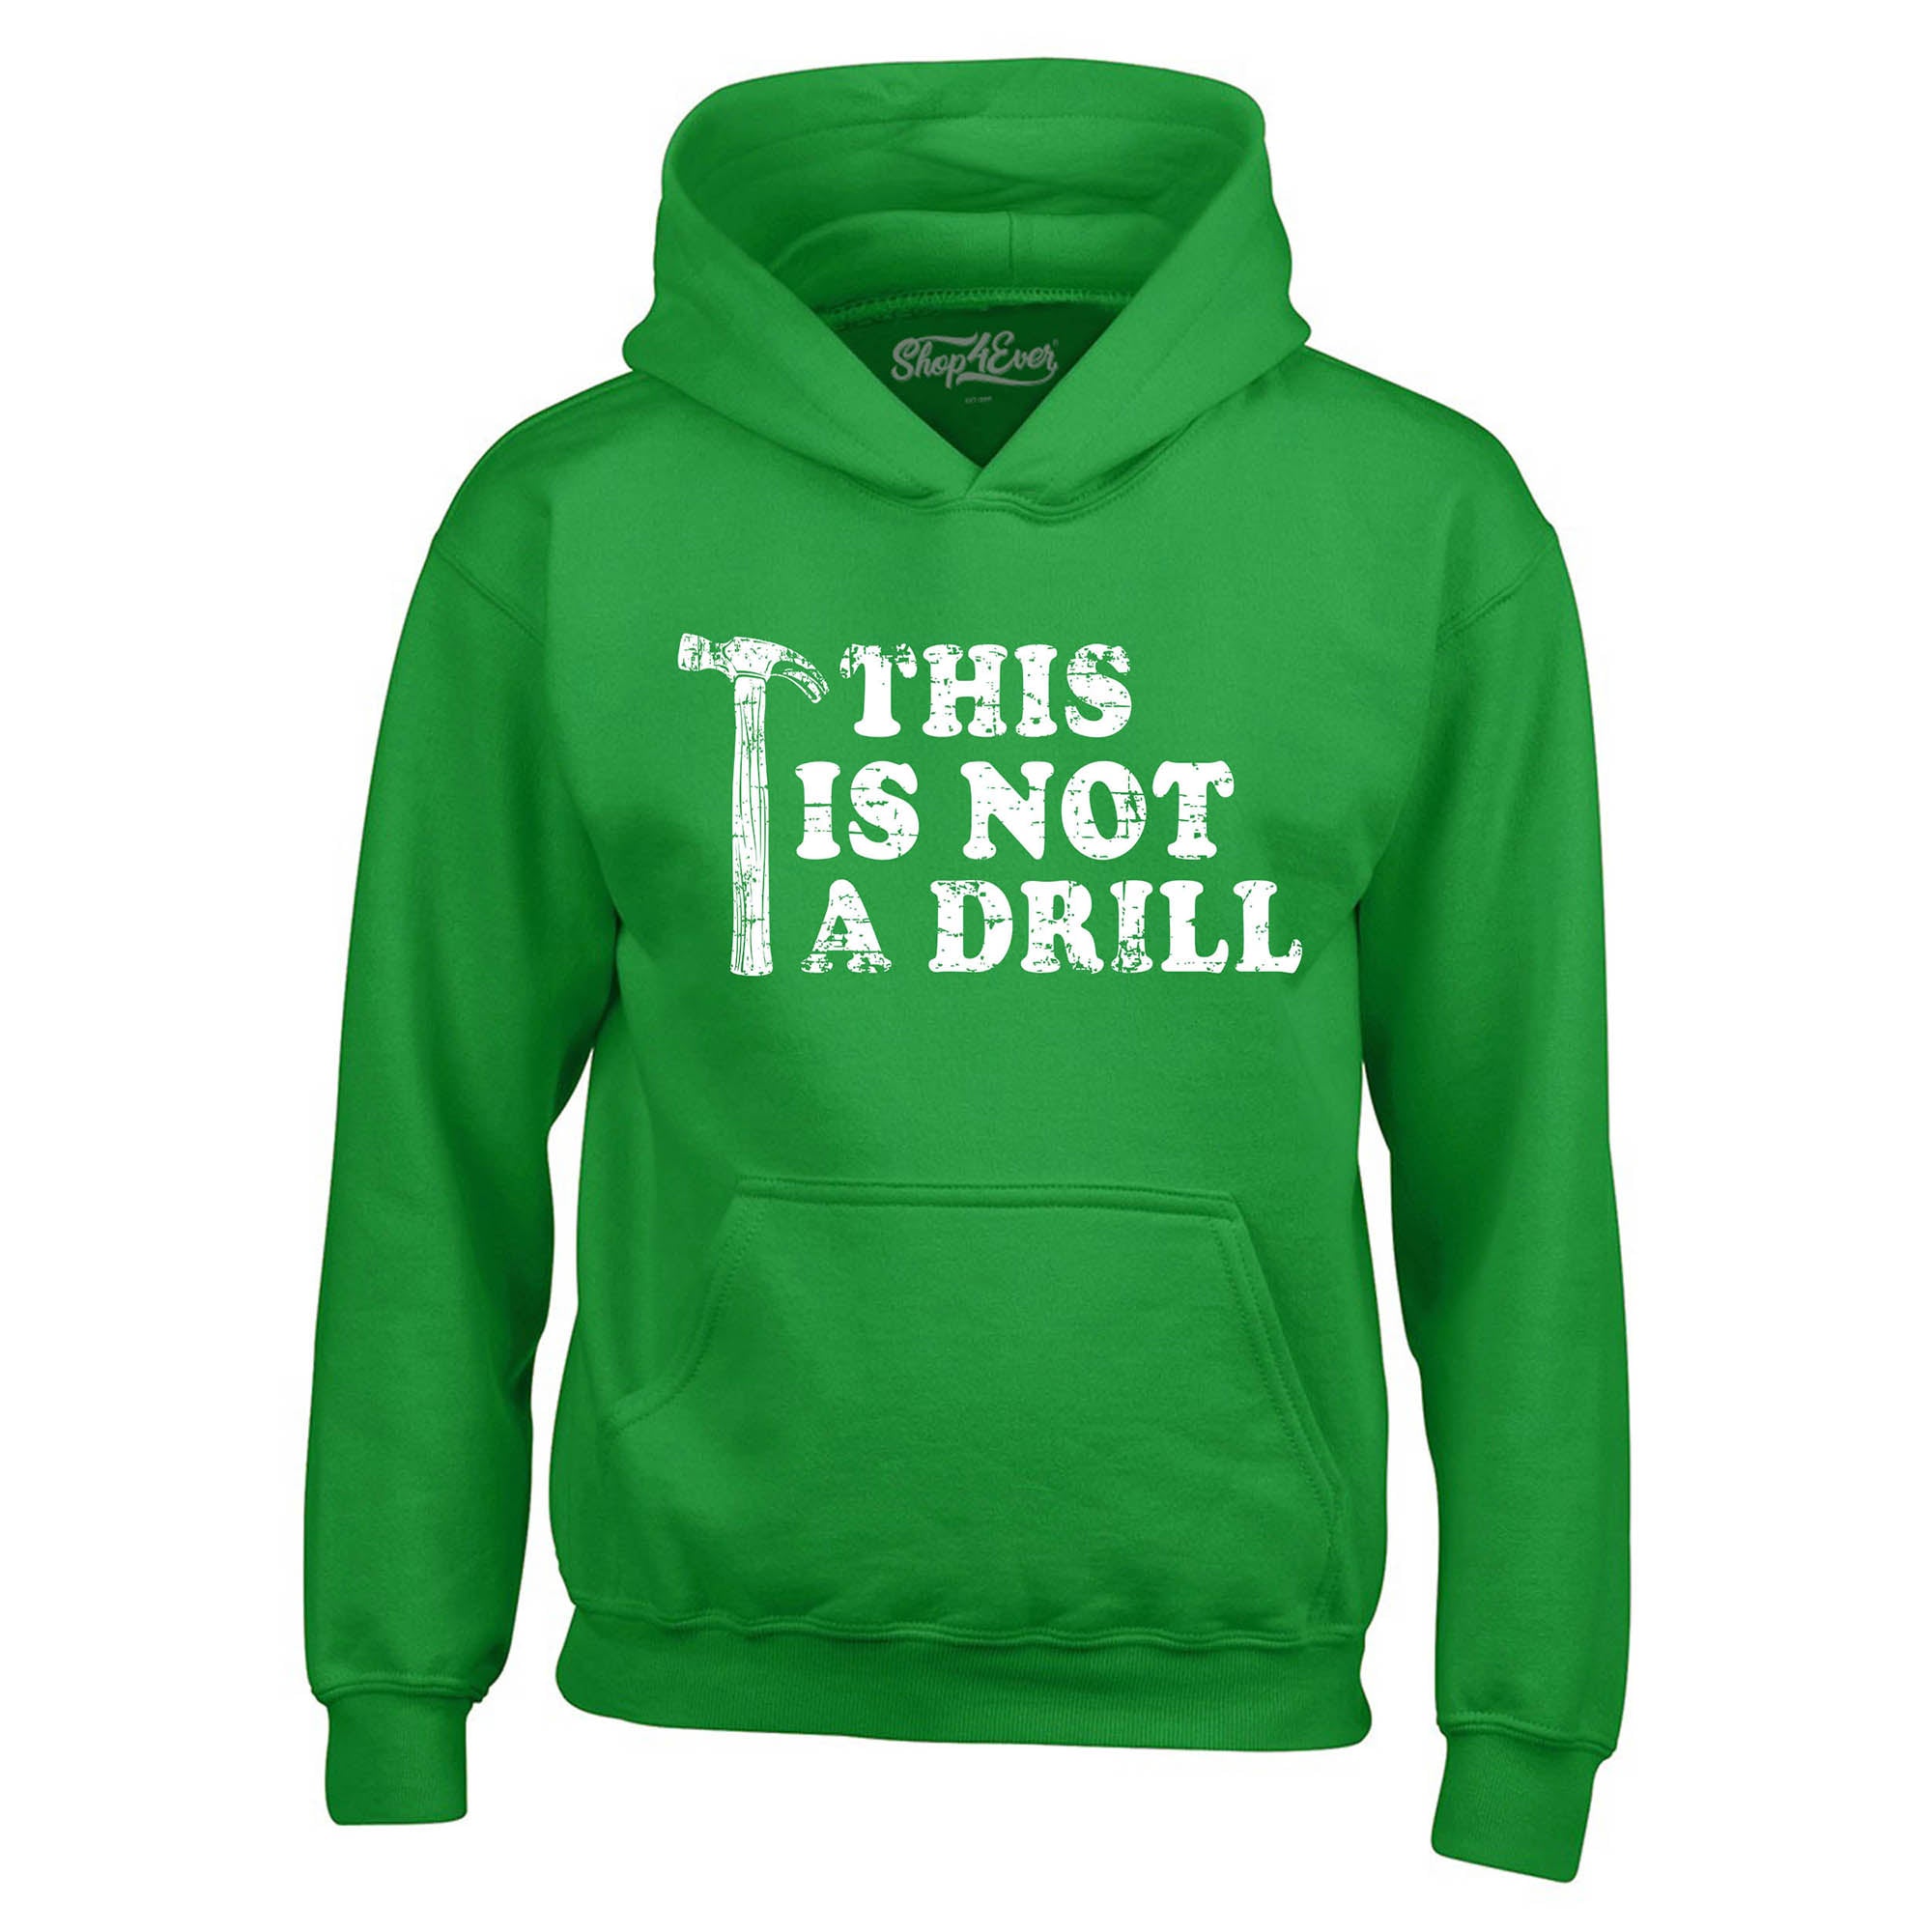 This is Not a Drill Hoodie Sweatshirts